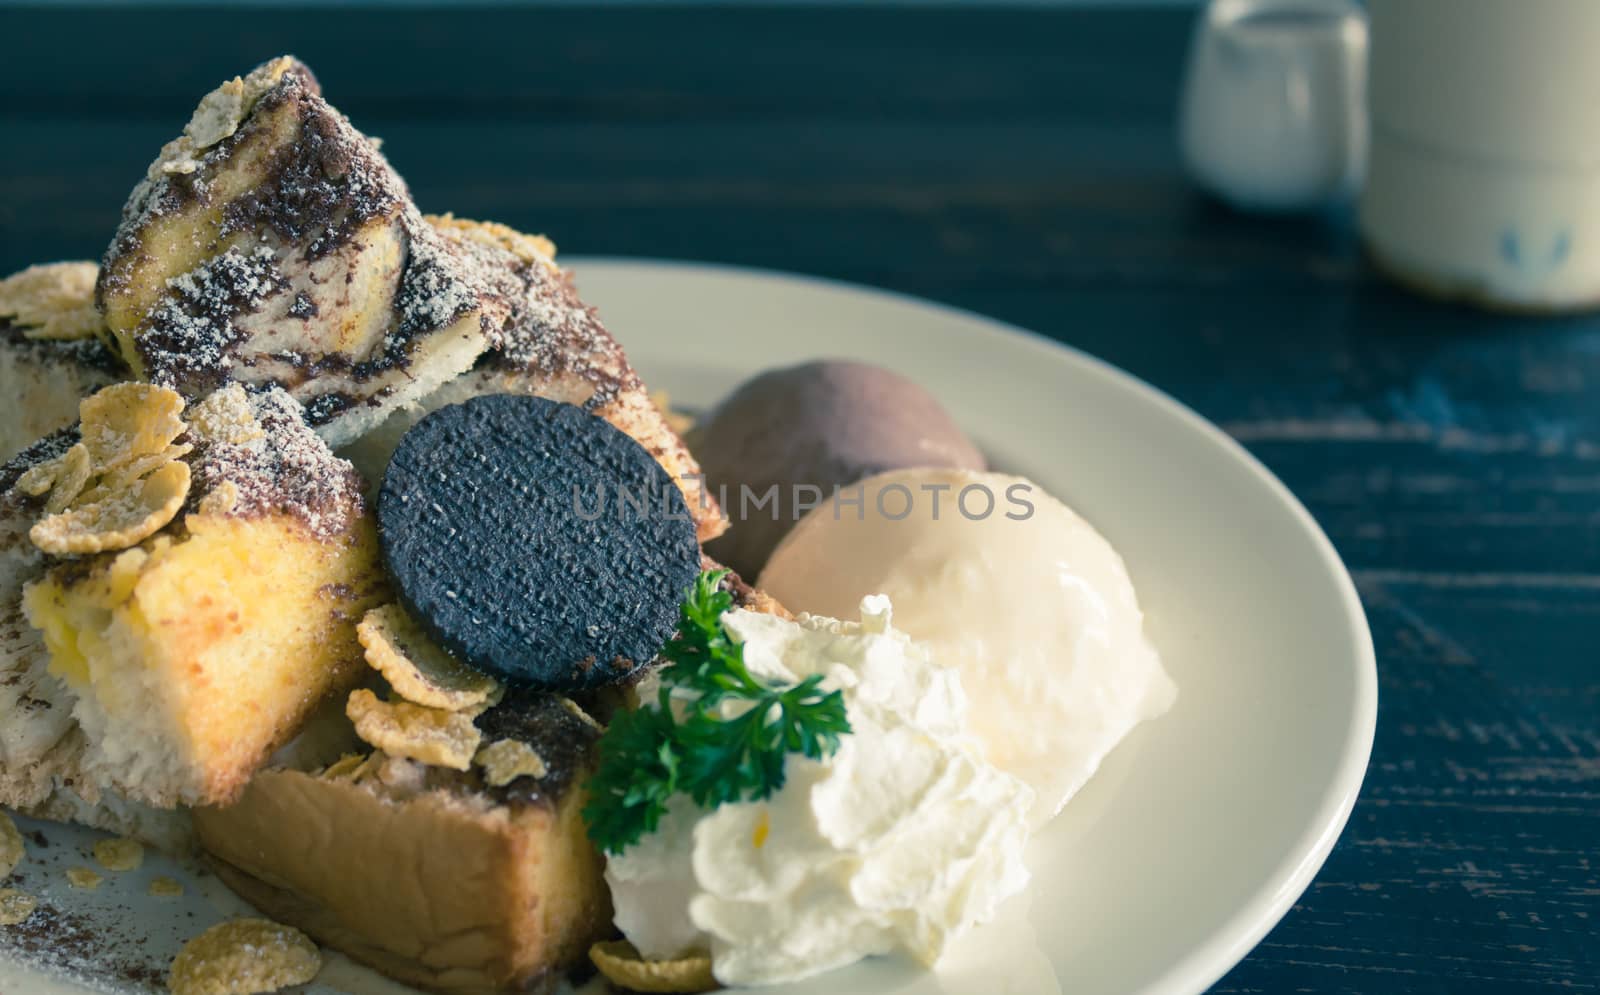 Toast Bread or Dessert and Oreo Cookies Ice Cream Cornflakes Whi by steafpong